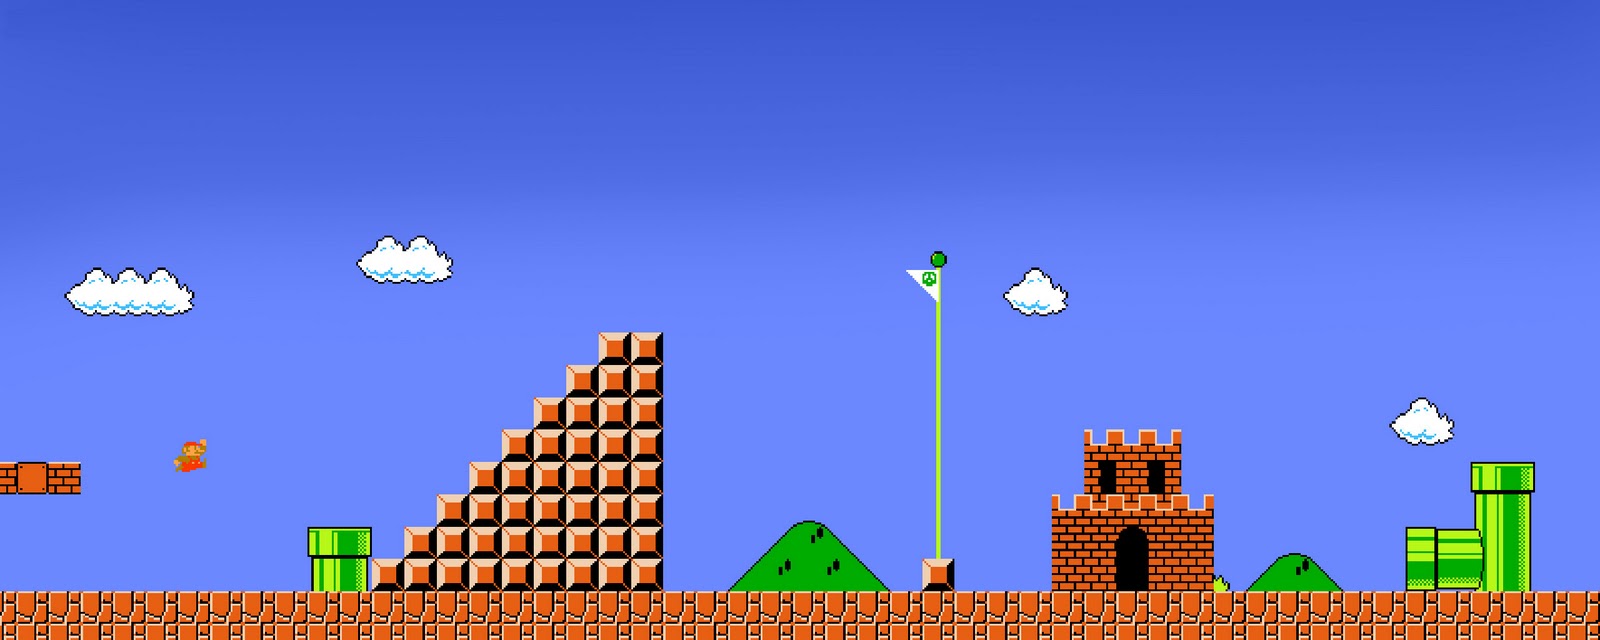 Wallpapers Retro Video Game Post